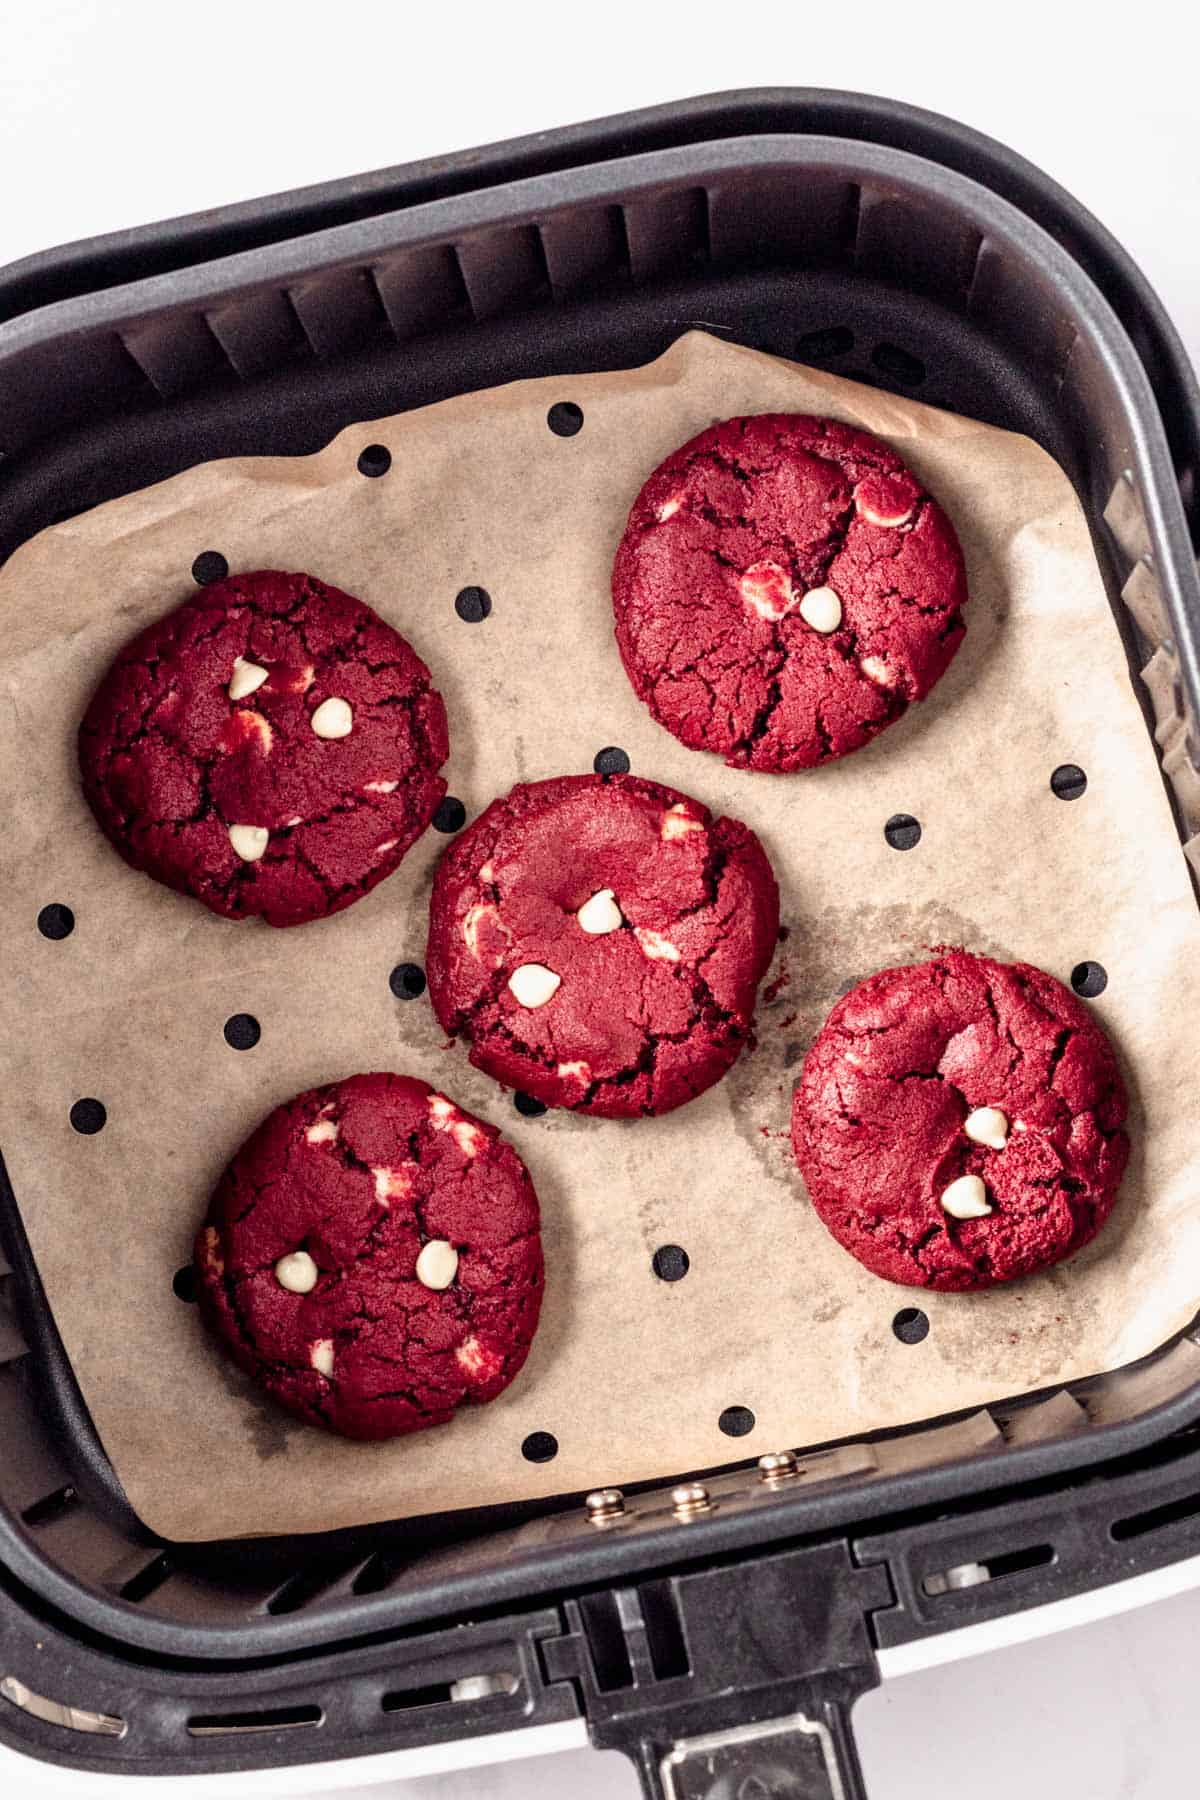 Red Velvet Cookies in air fryer right after baking